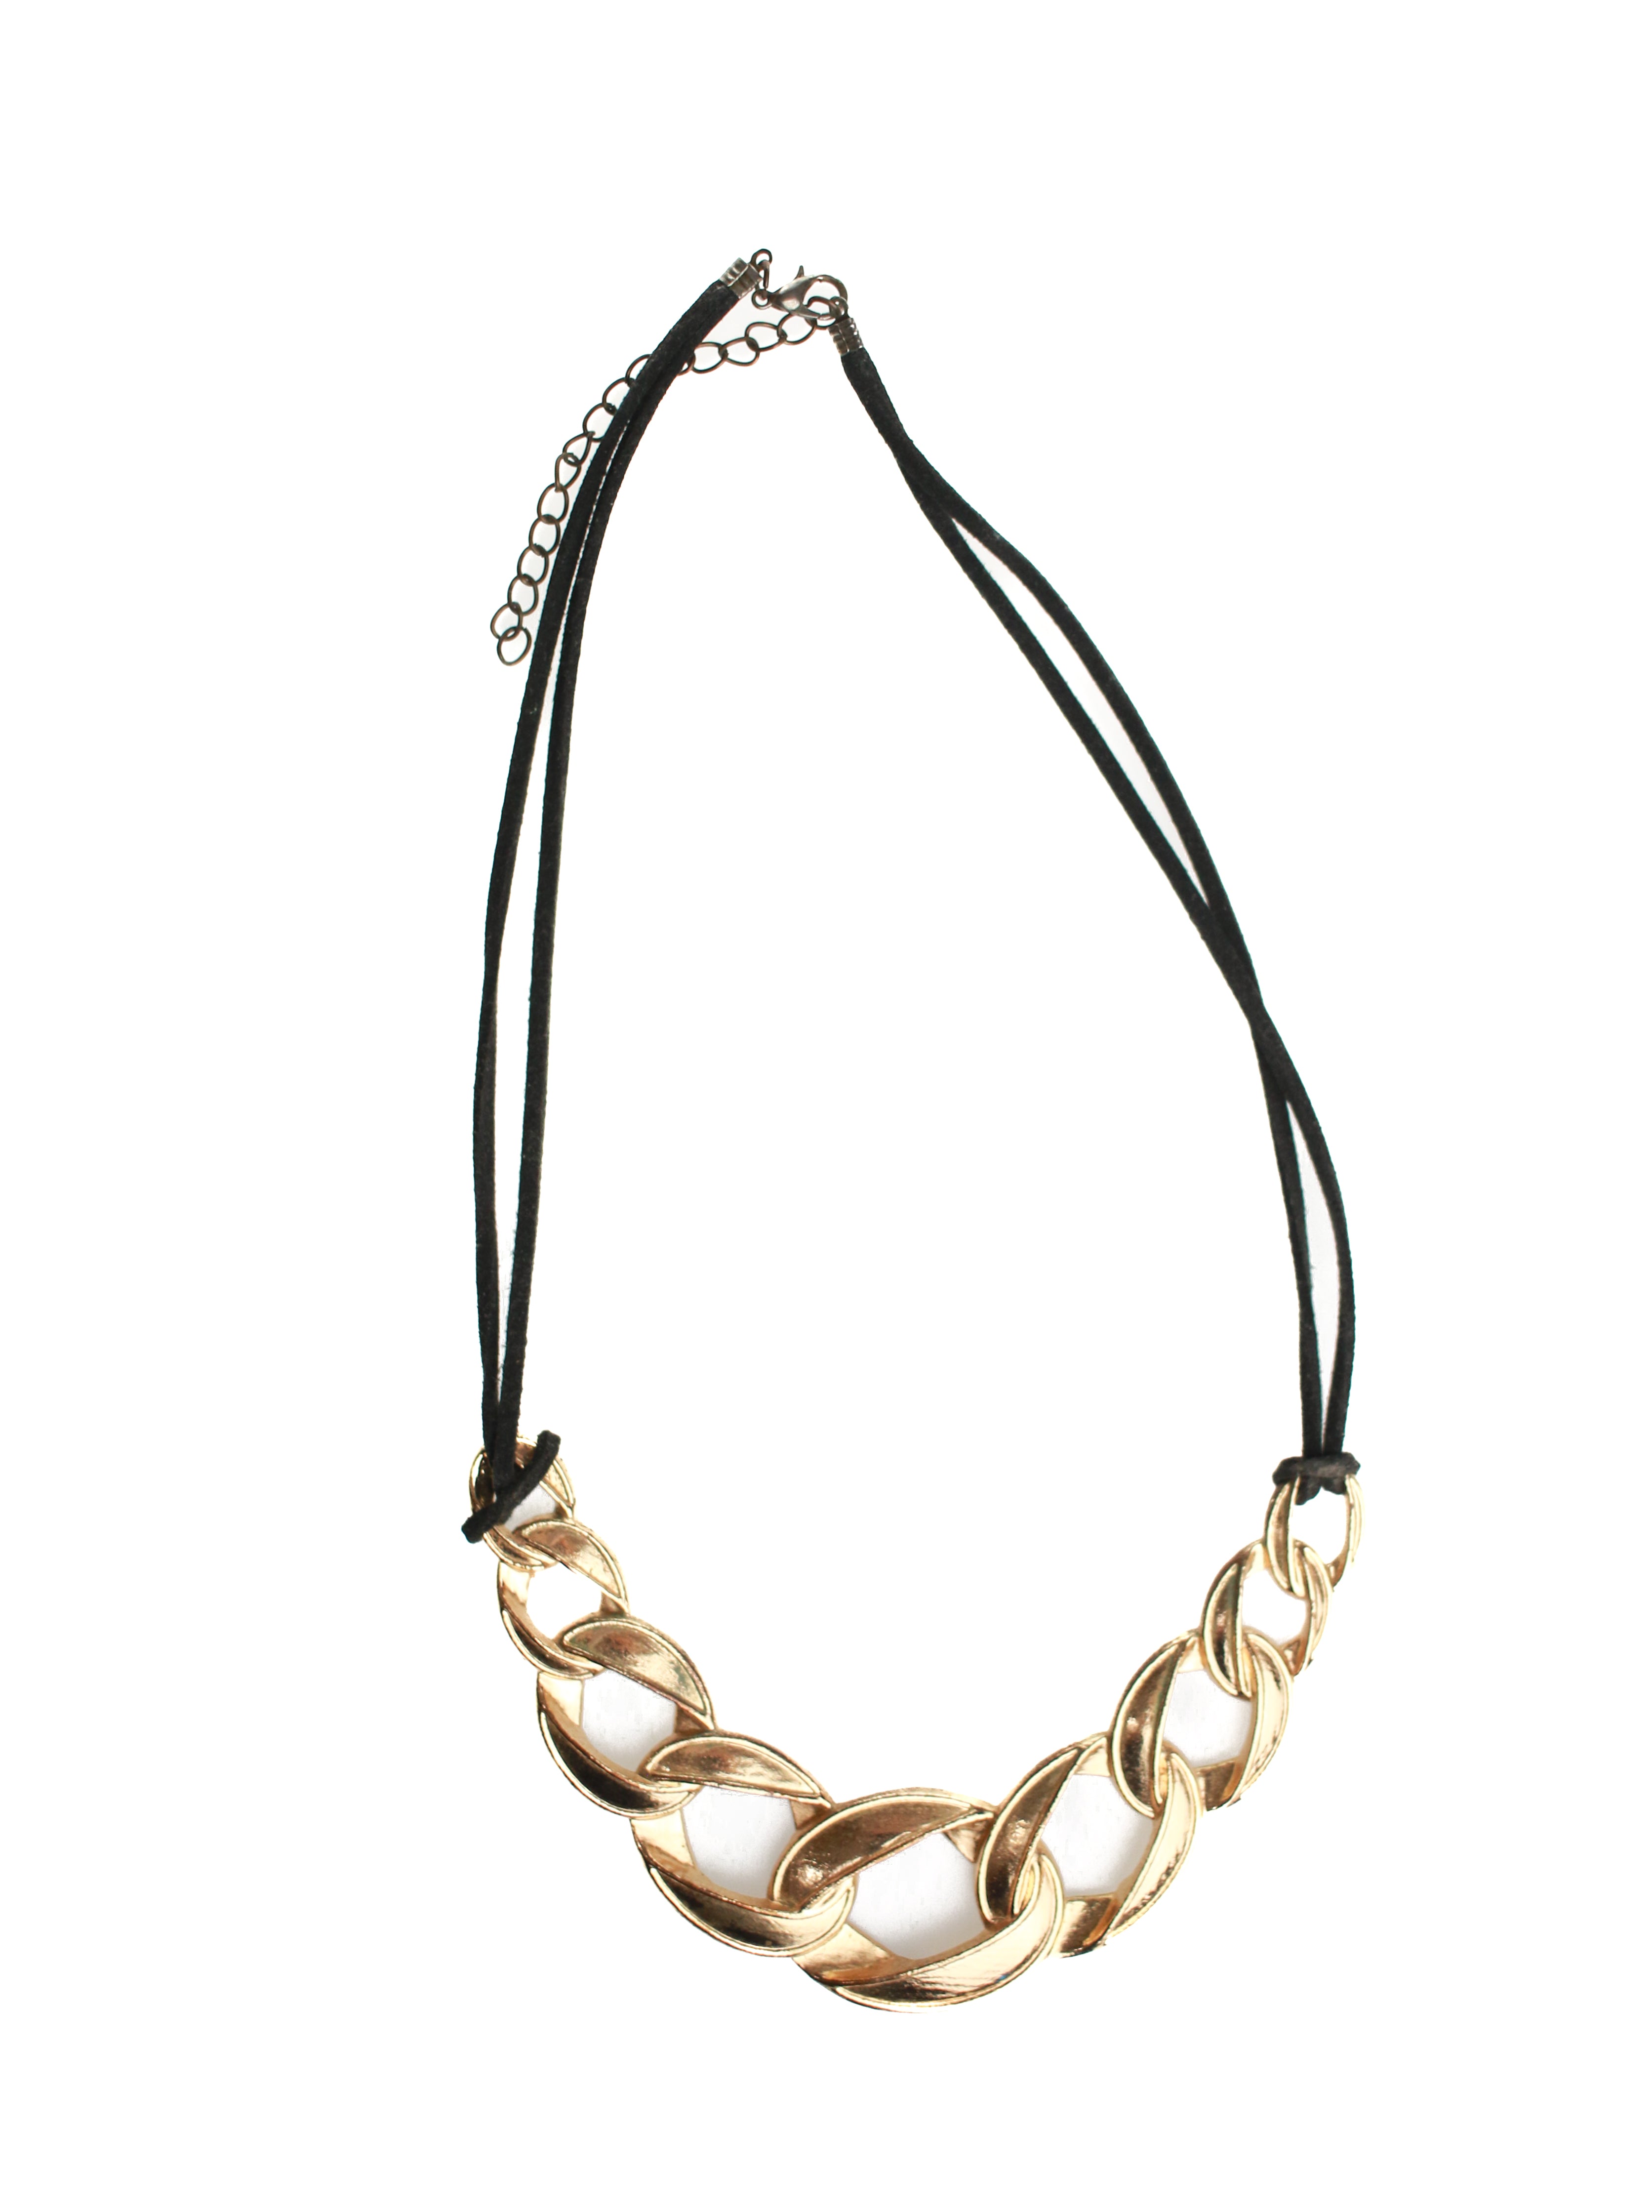 Whit's Vintage Picks- Cord and Brass Statement Necklace